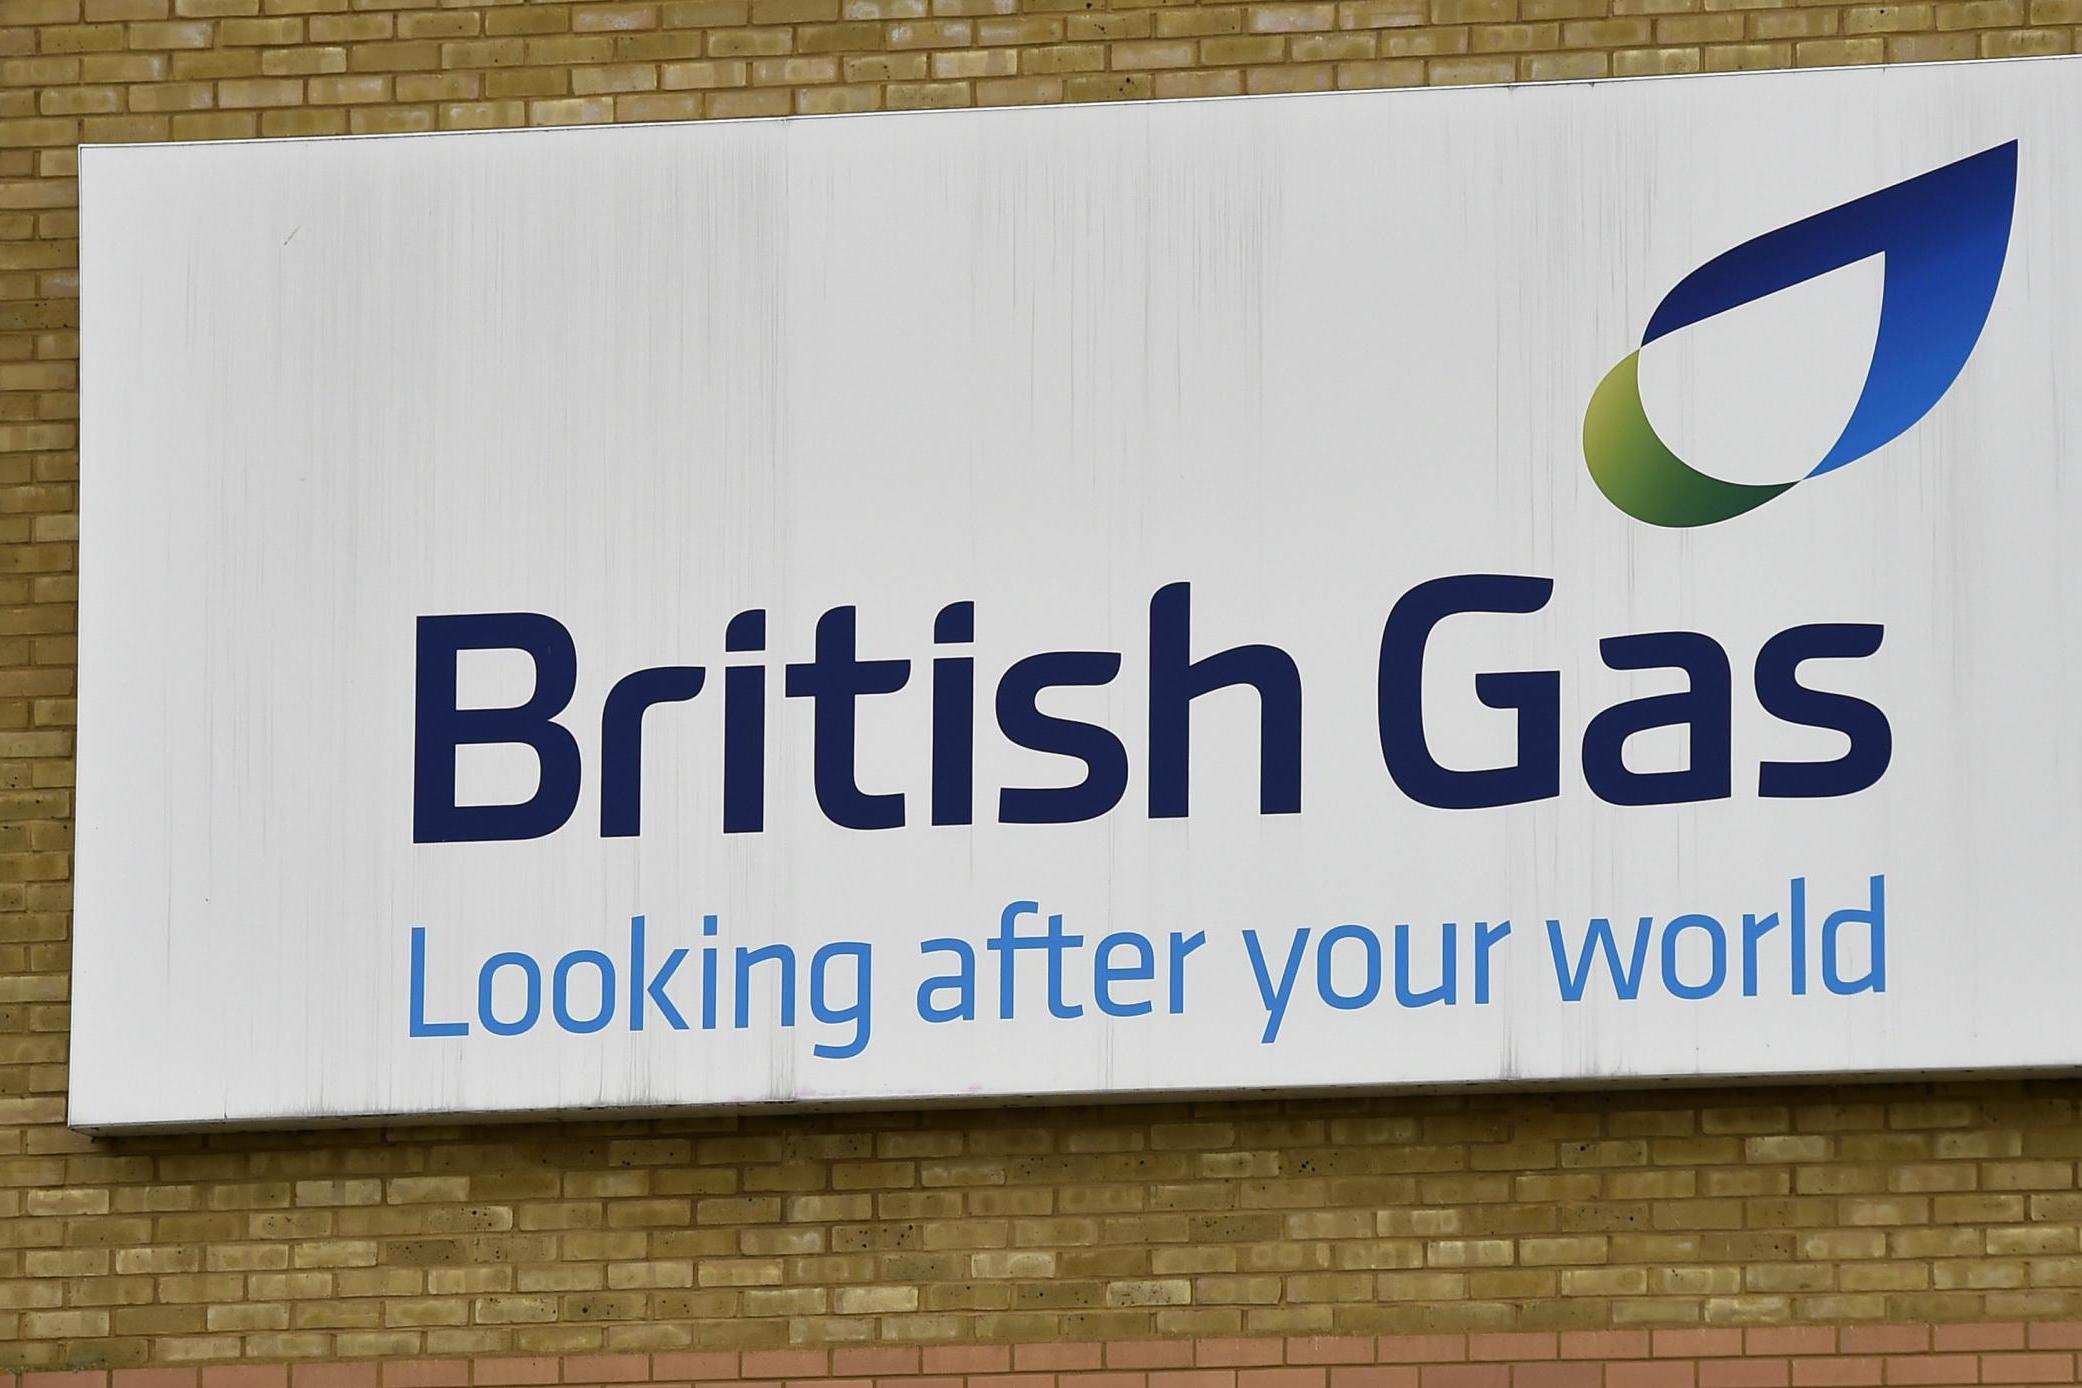 British Gas: shares in Centrica jumped after Ofgem unveiled its energy price cap